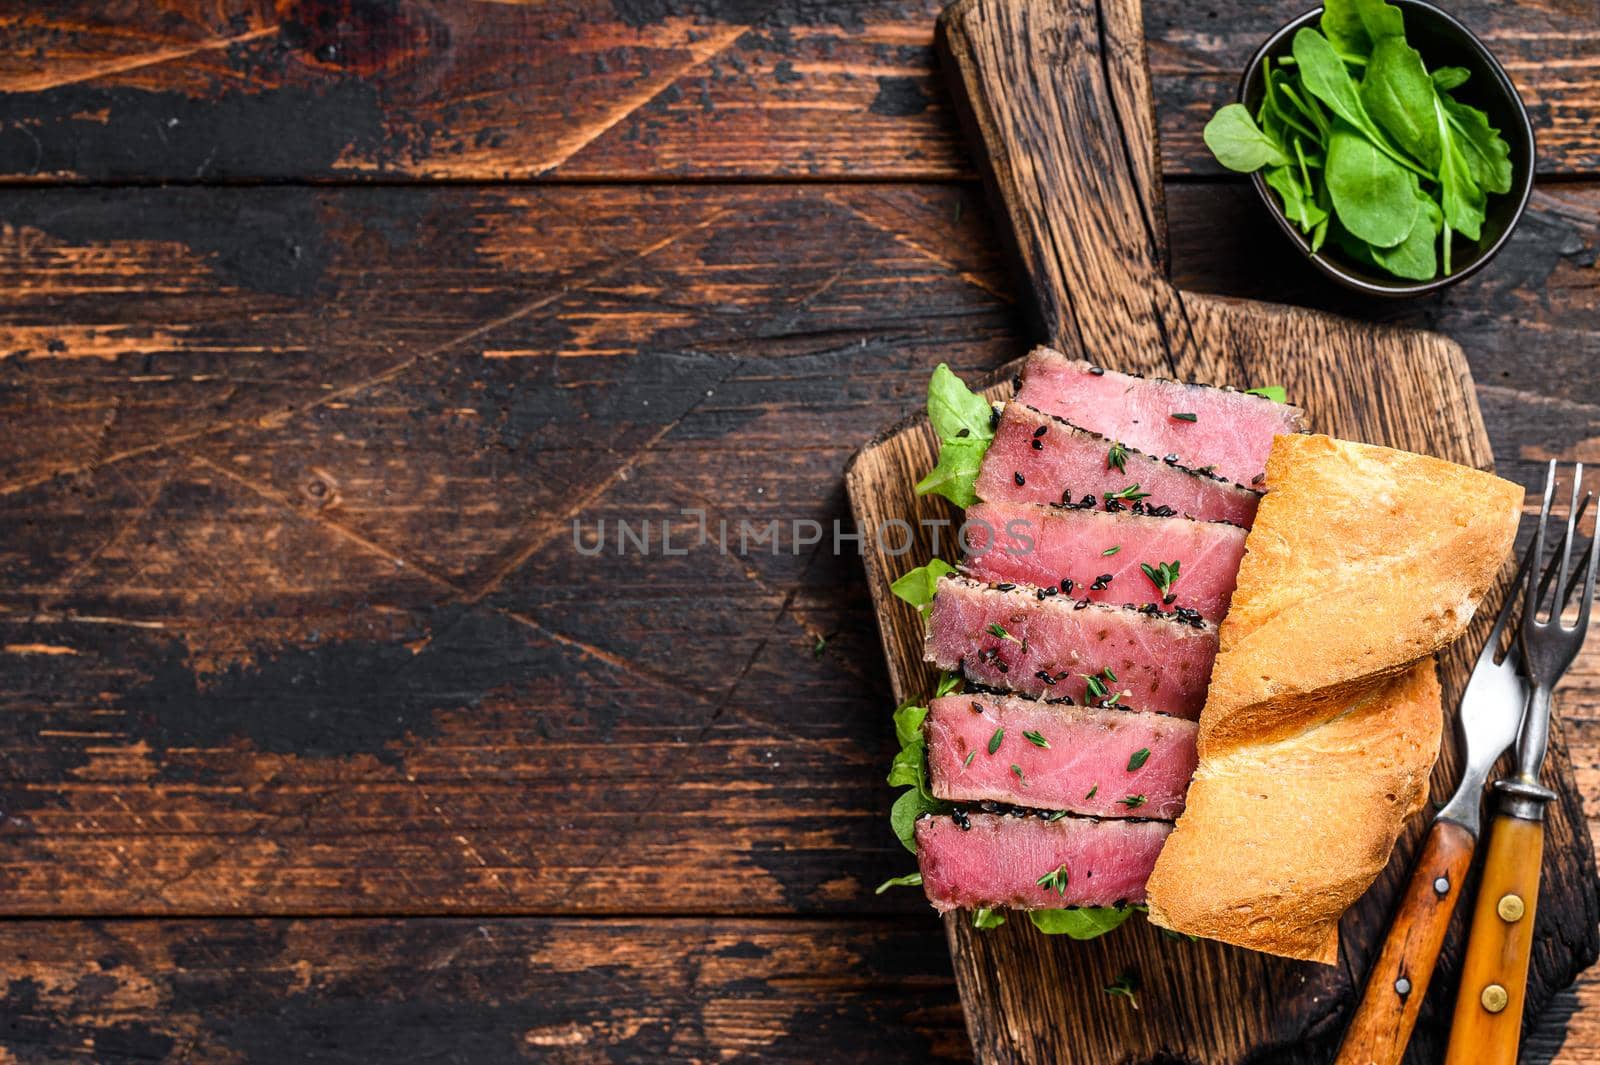 Grilled Ahi Tuna Steak and Avocado Sandwich with arugula on a cutting board. Dark wooden background. Top view. Copy space.